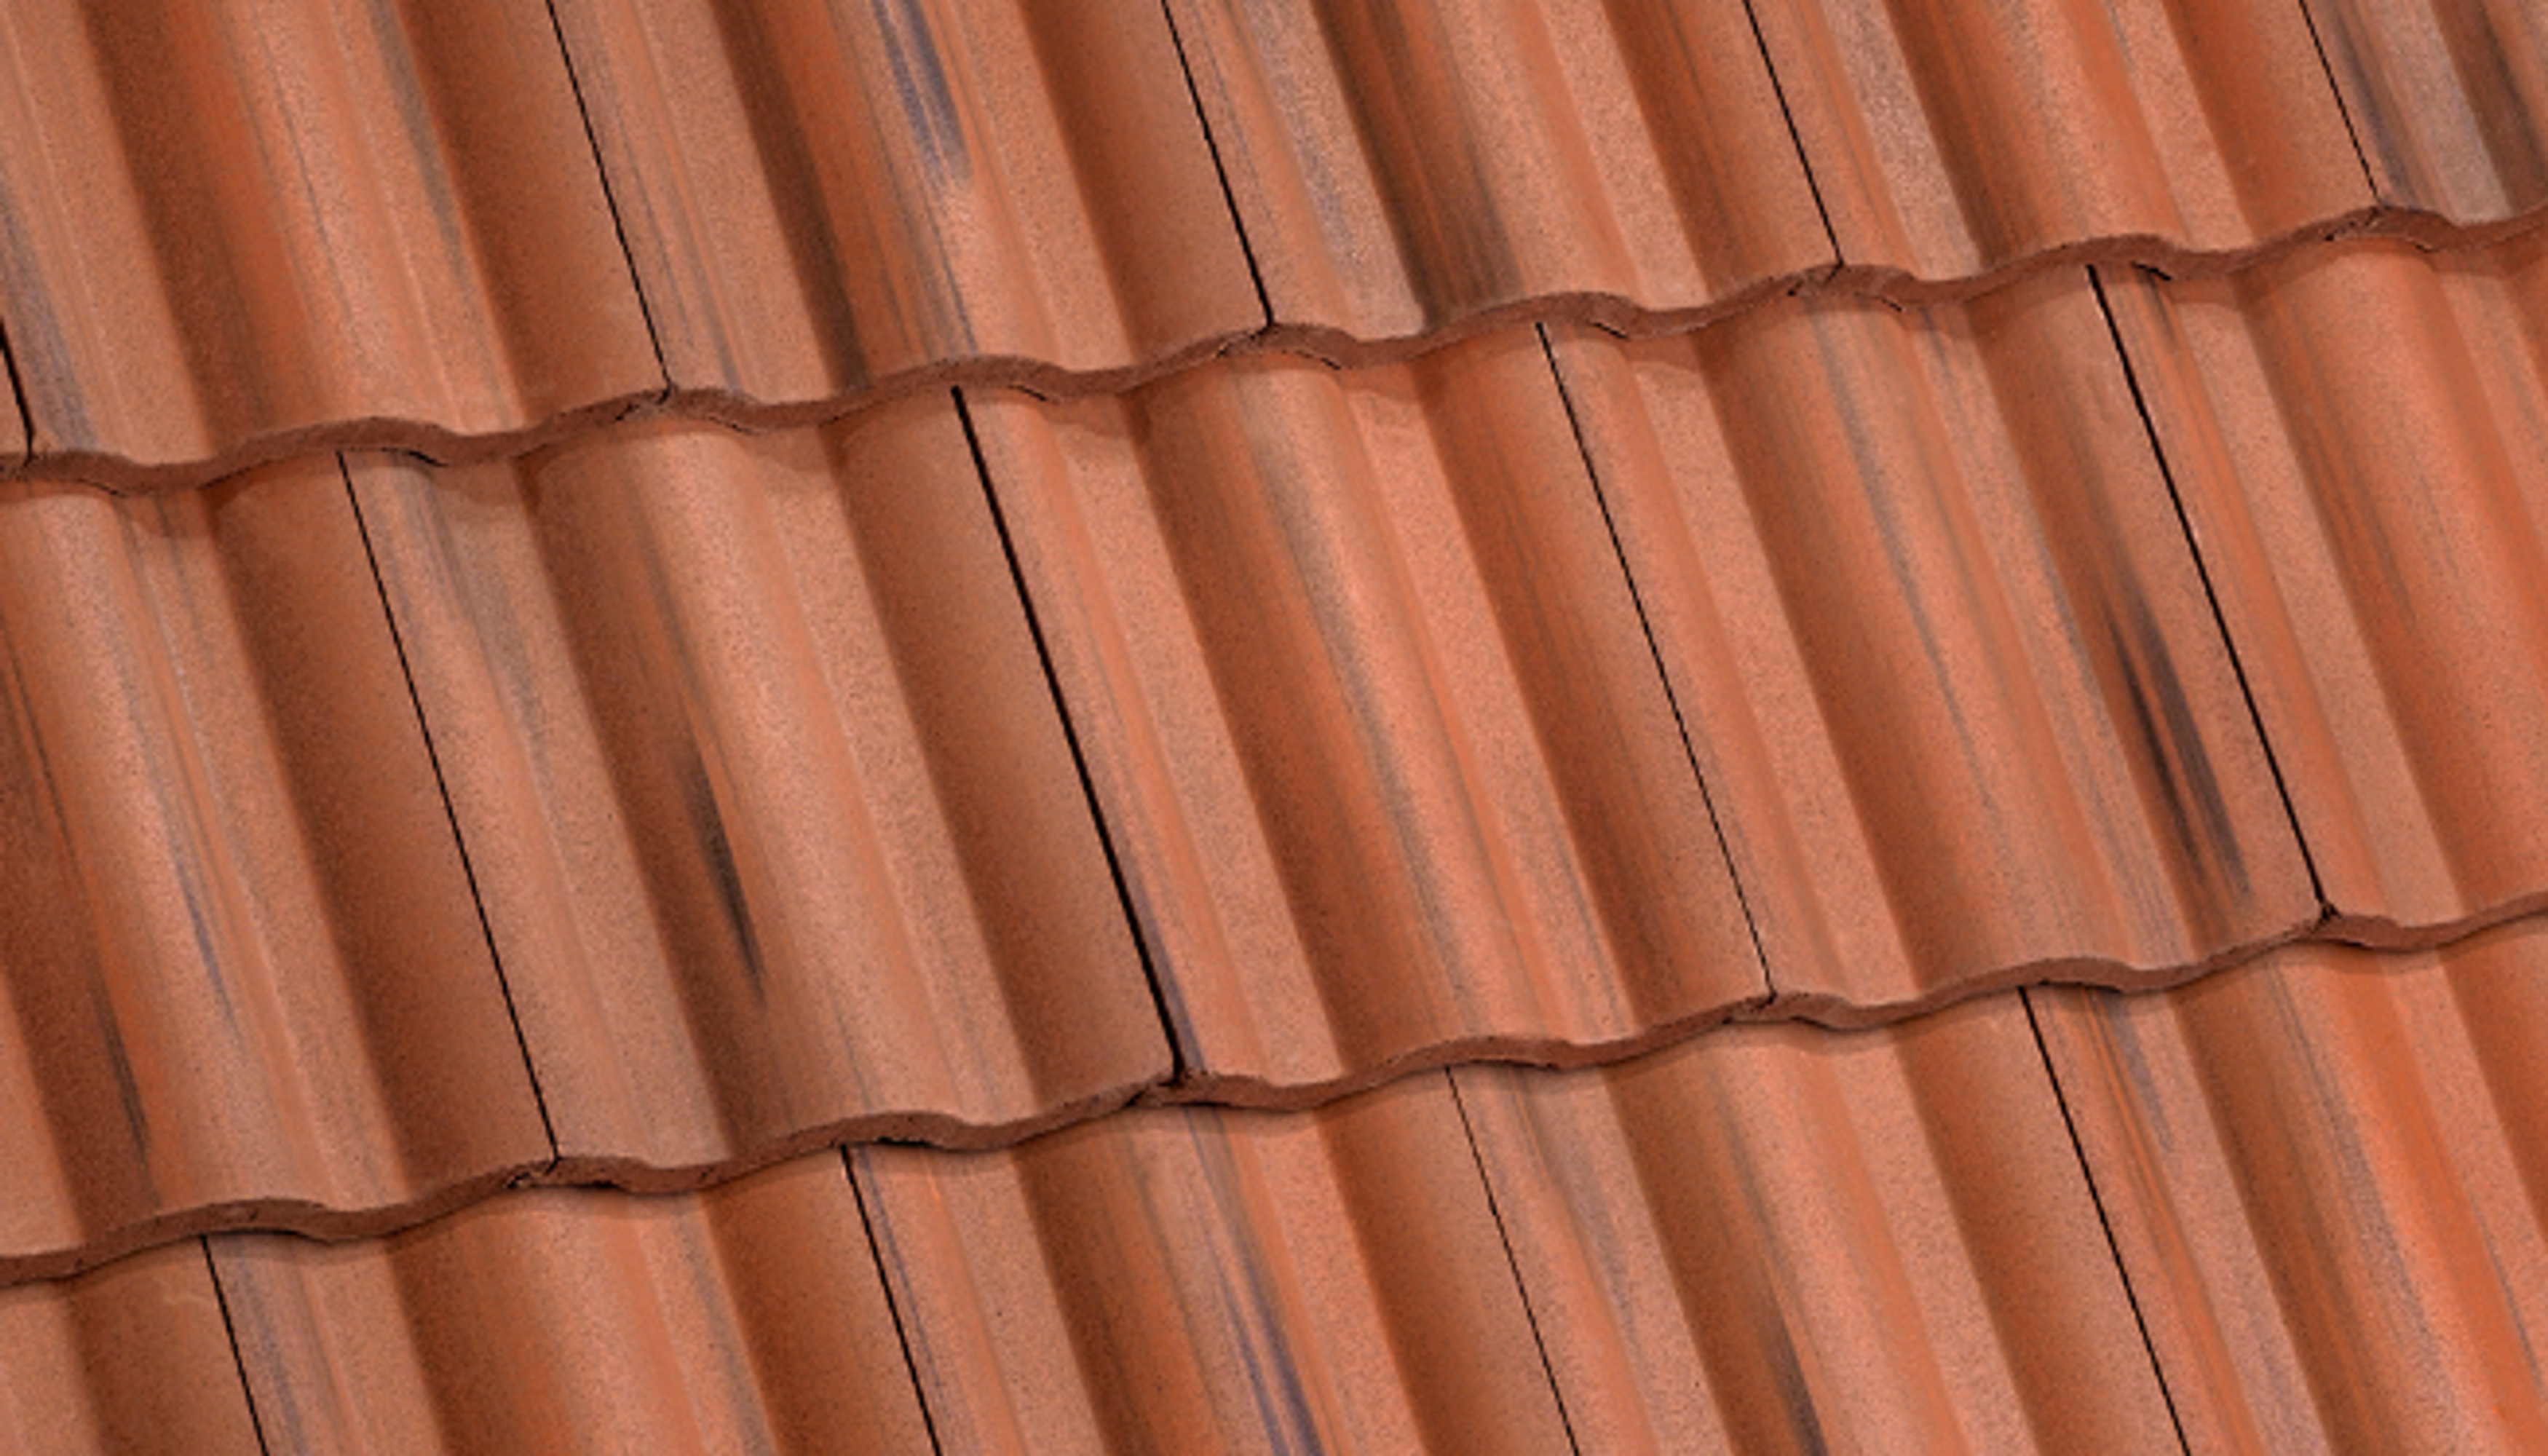 "Close-up of a red tile roof made of durable and aesthetically pleasing tile material for roofing."